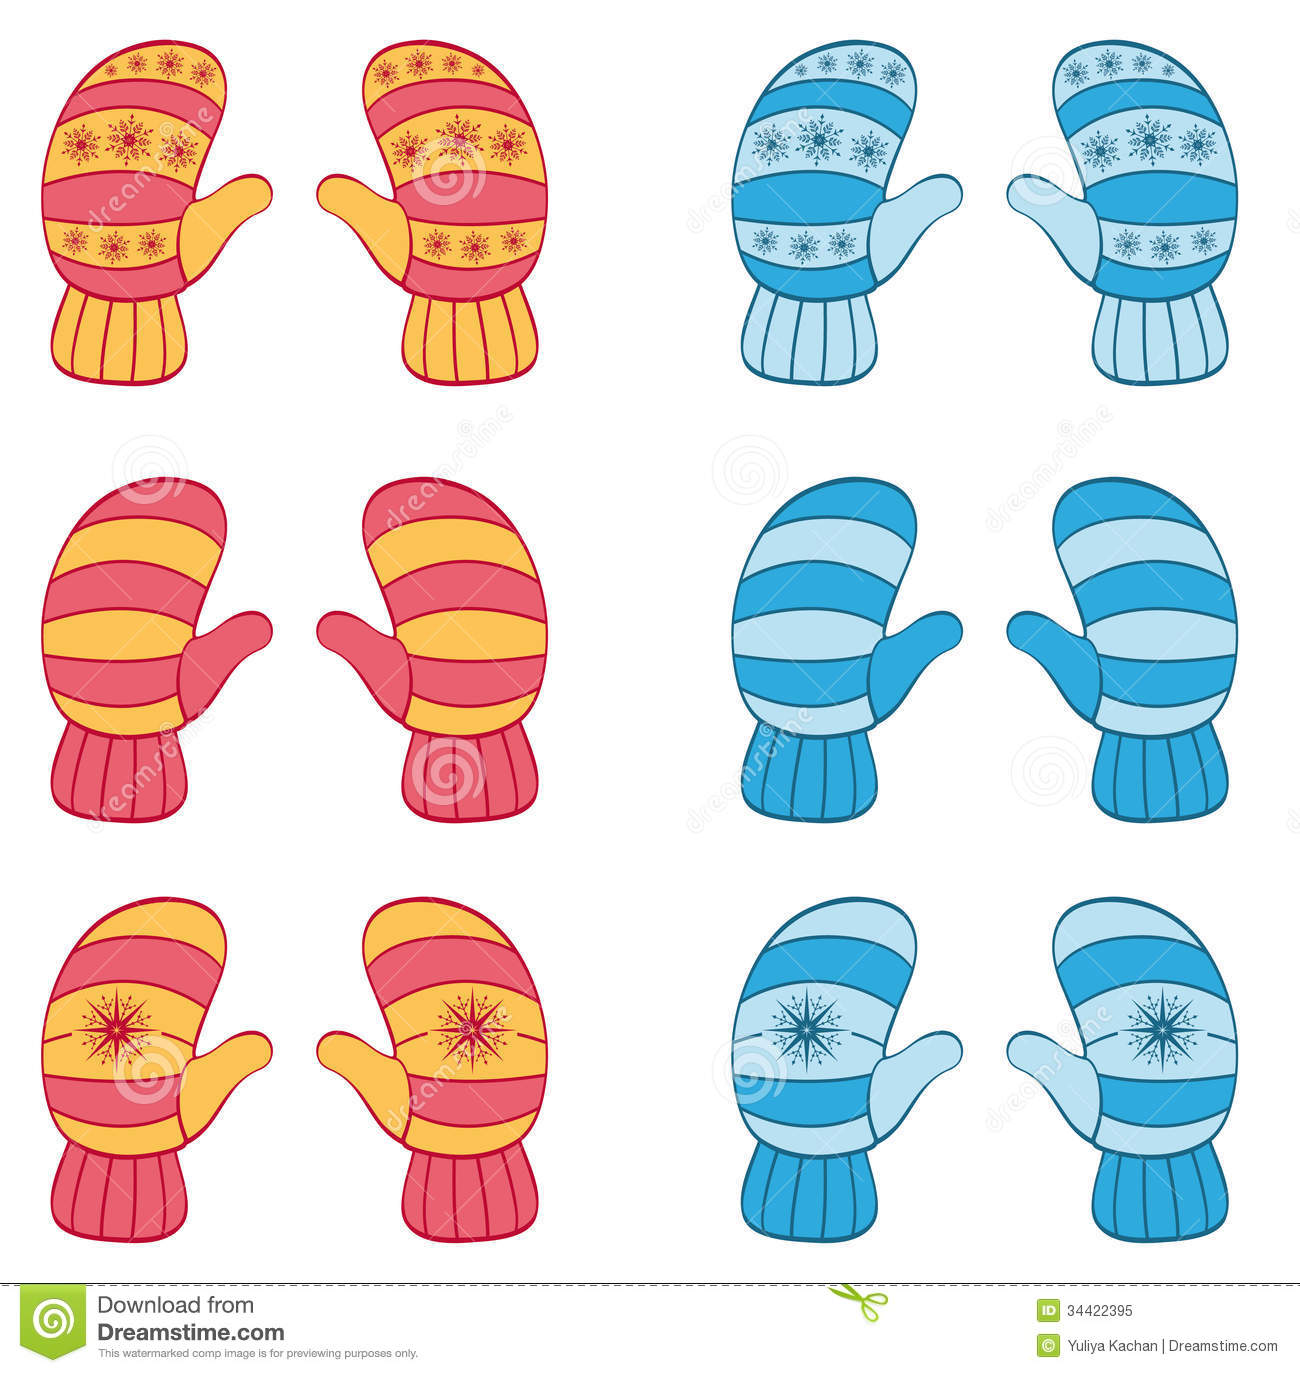 hat and mittens clipart - photo #47